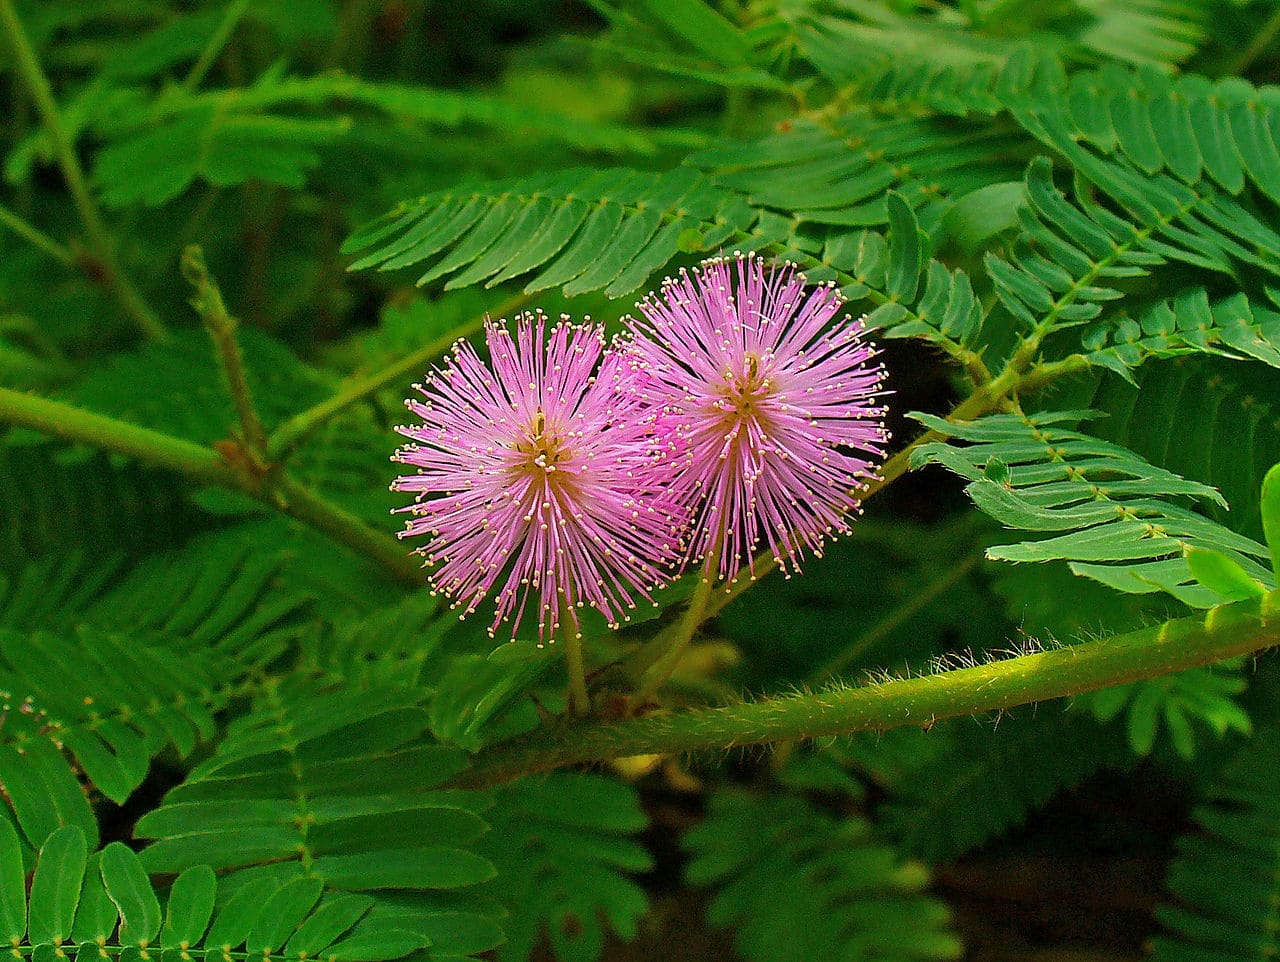 Curiosities of the mimosa plant